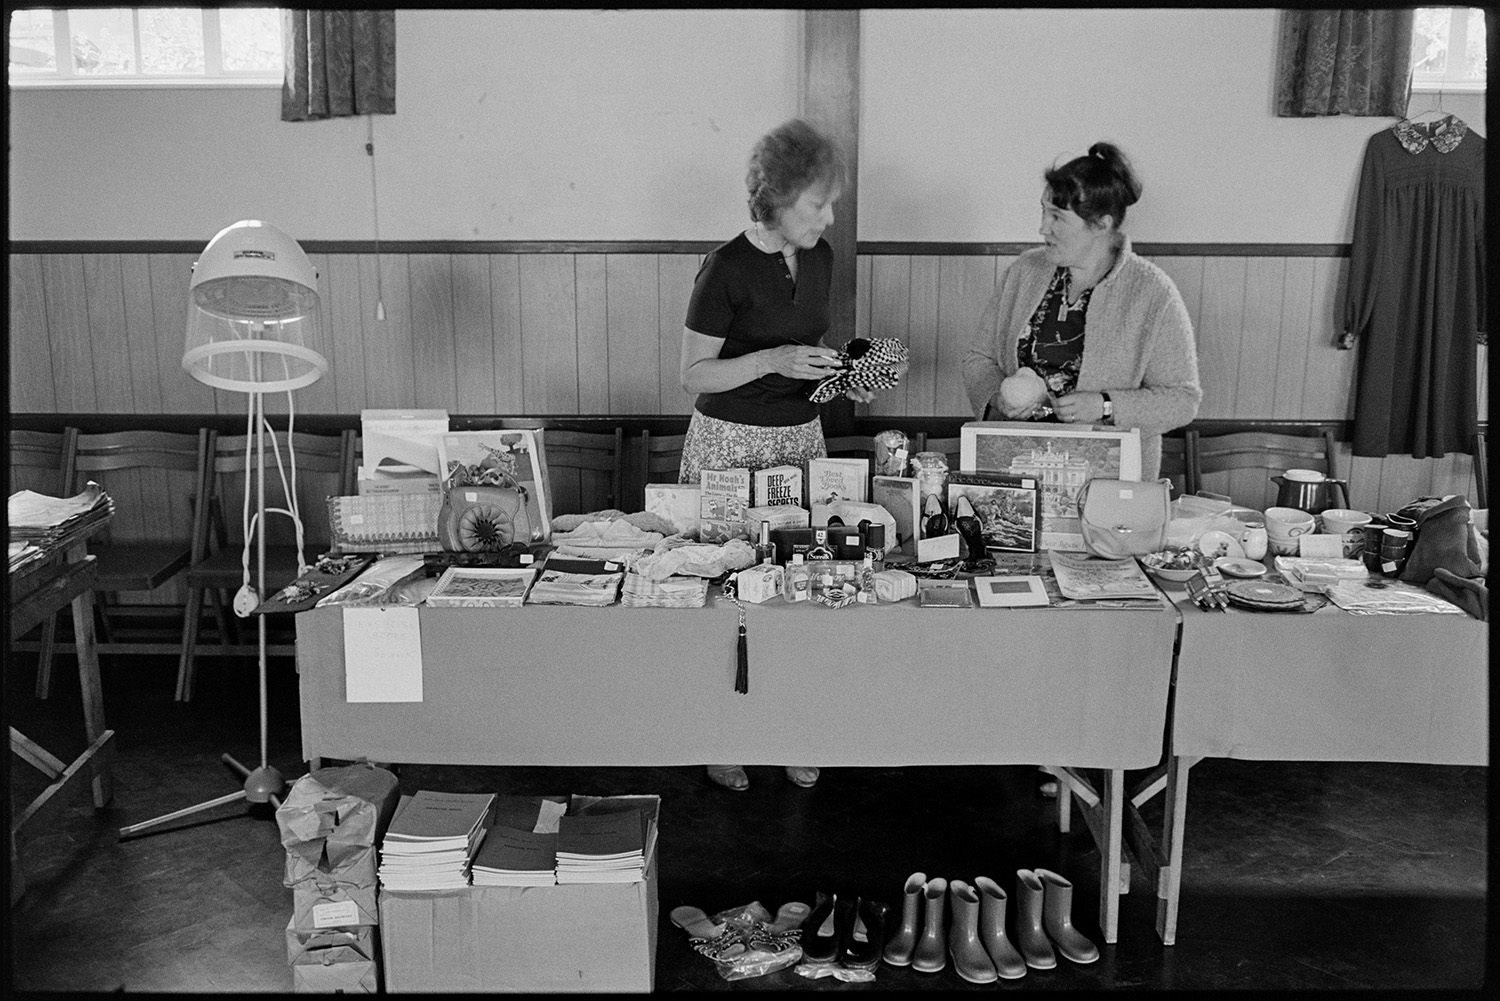 Schoolchildren giving concert in village hall, headmistress and children singing. 
[Two women running a bric-a-brac stall in an event at Dolton Village Hall. Various items are visible including books, wellington boots for children and a hairdryer.]